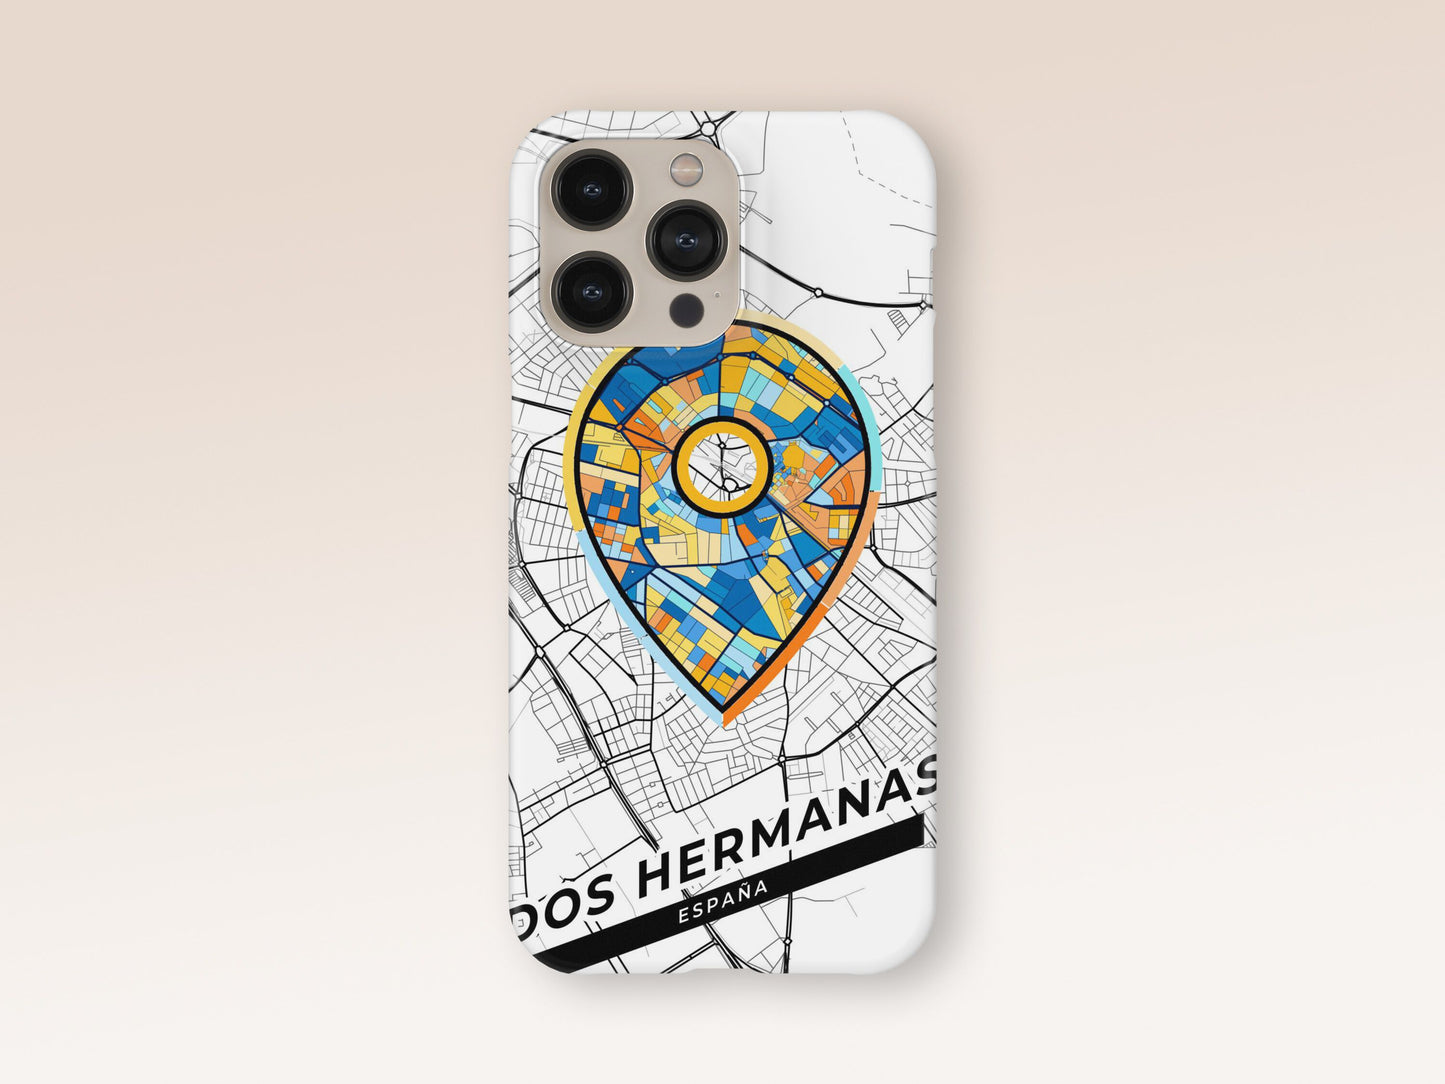 Dos Hermanas Spain slim phone case with colorful icon. Birthday, wedding or housewarming gift. Couple match cases. 1